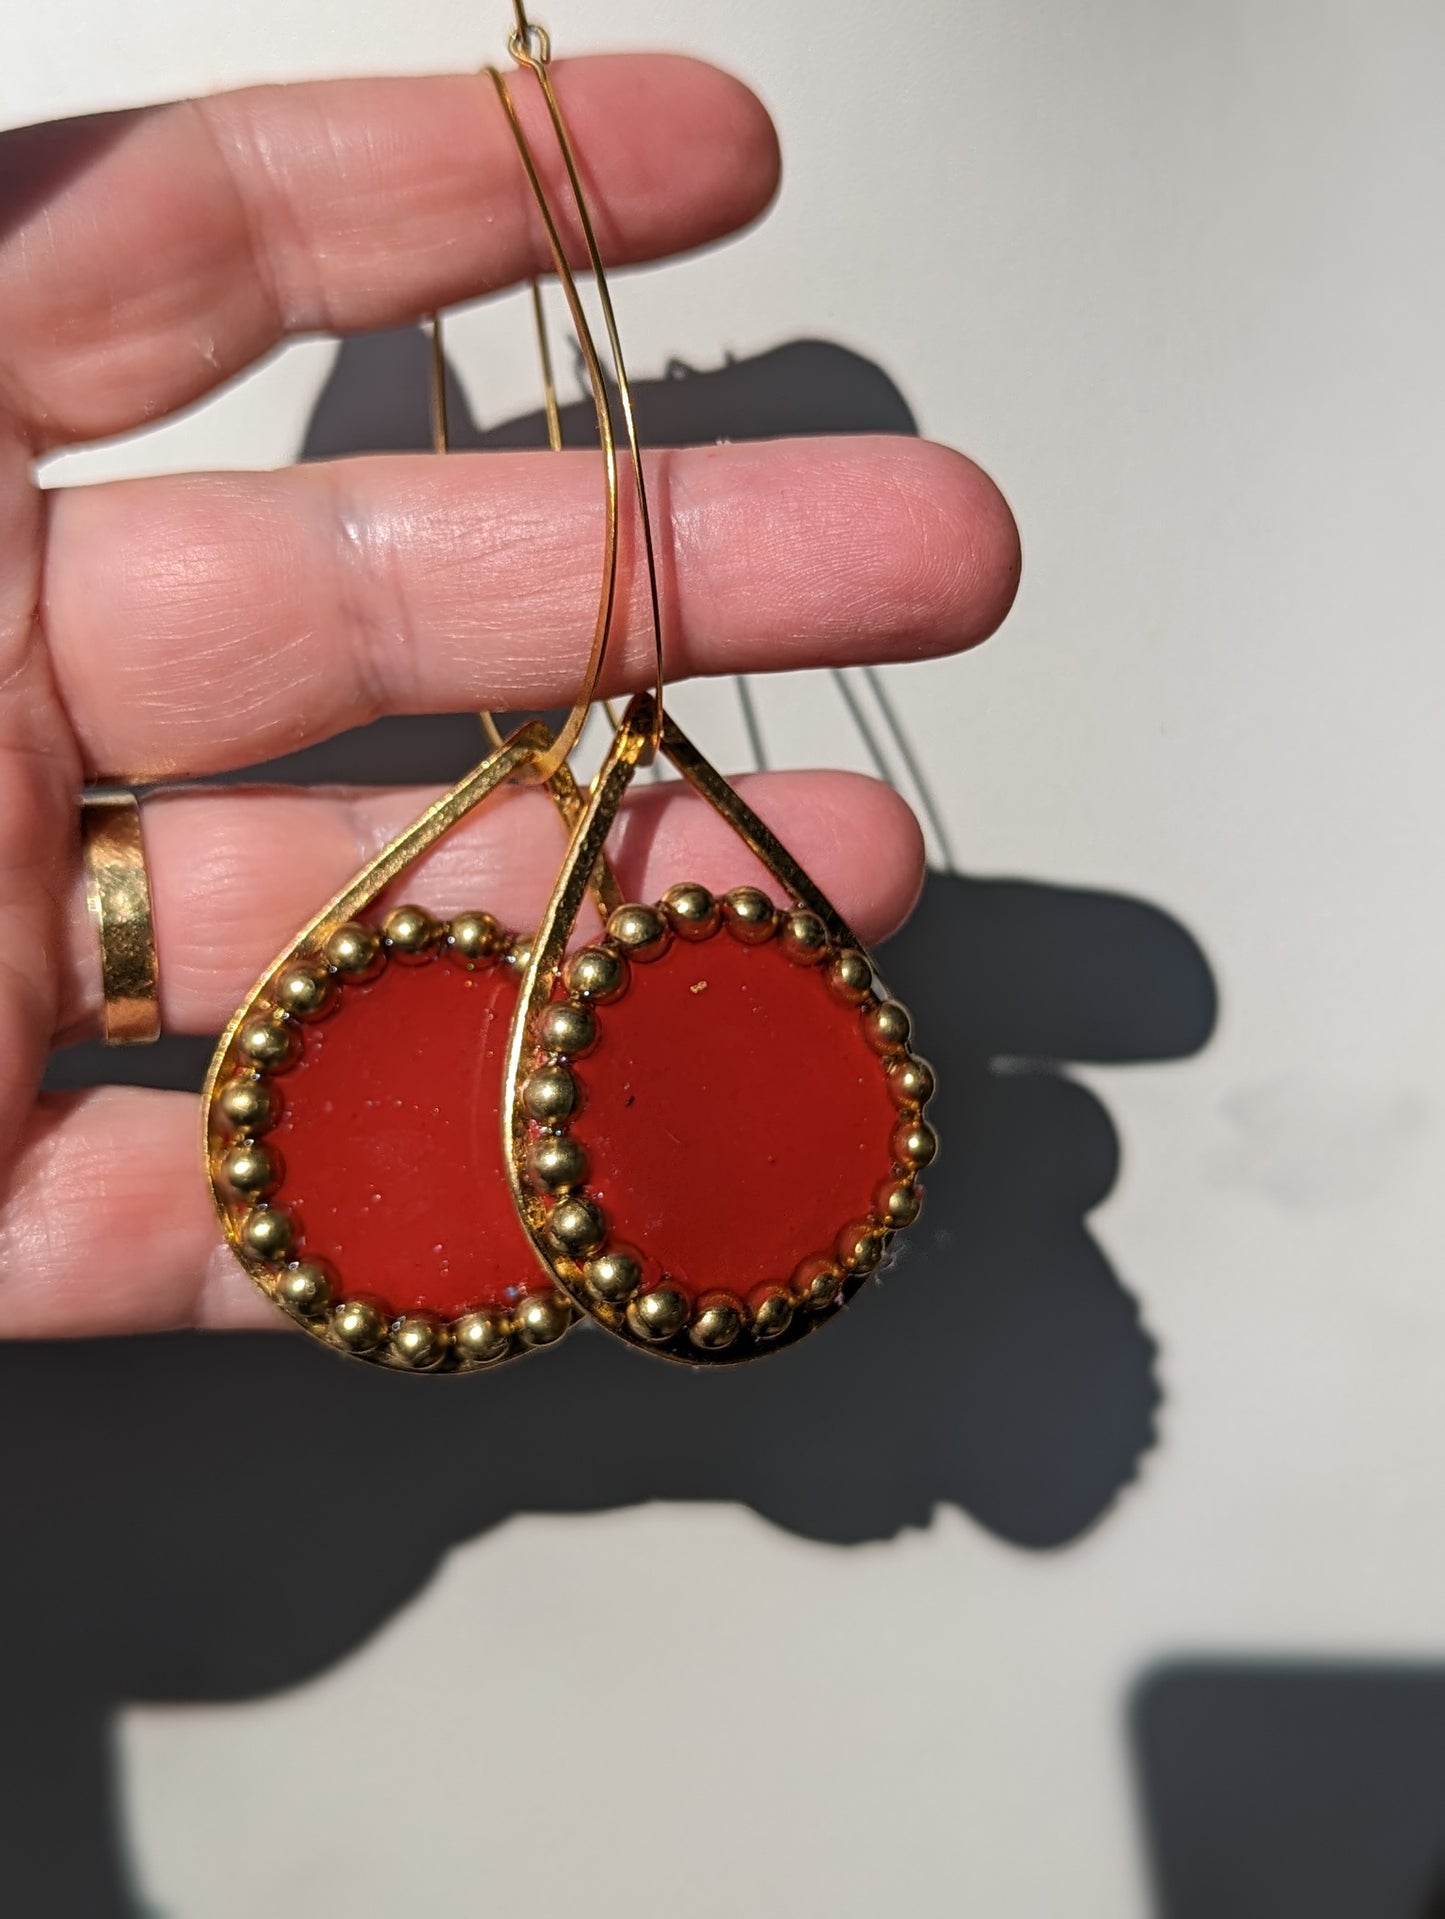 Red Faceted Glass Earrings Circle Post Gold Plated USA made Gay Isber As seen in AC Magazinehipping